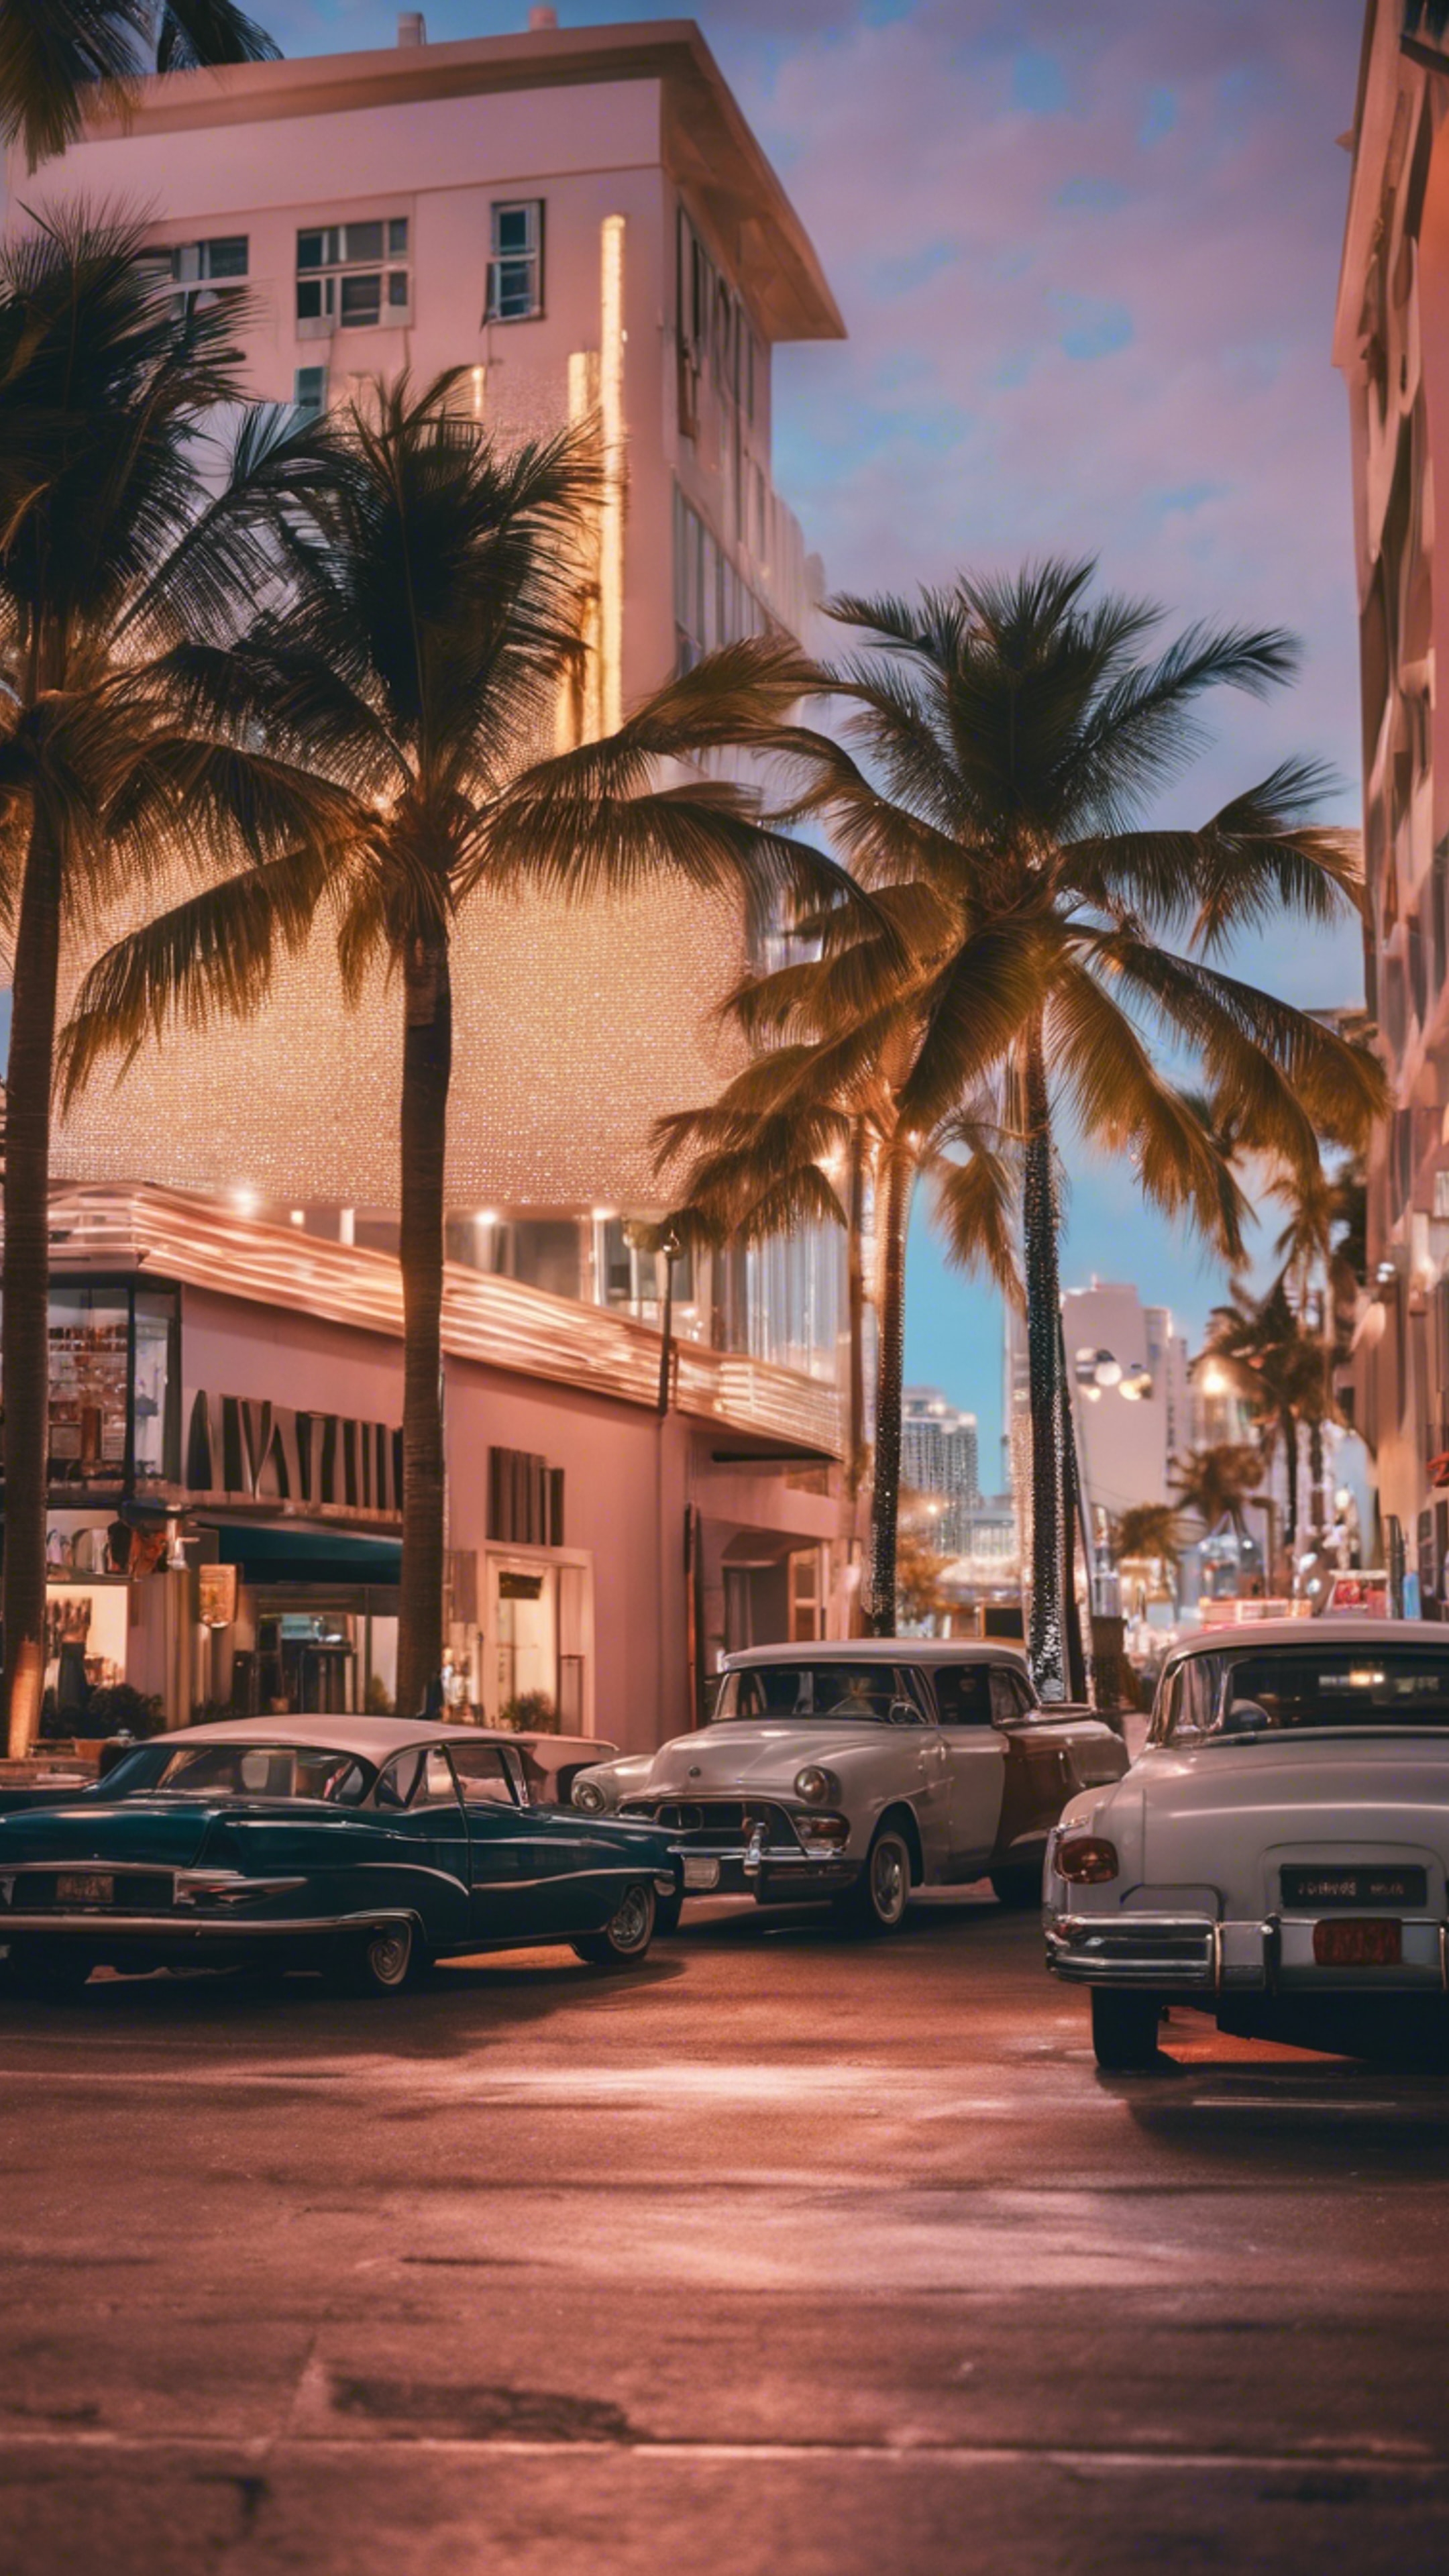 A bustling Miami Beach street scene, with art deco buildings and palm trees, vibrant nightlife atmosphere. Тапет[c899e7f744884bb387cd]